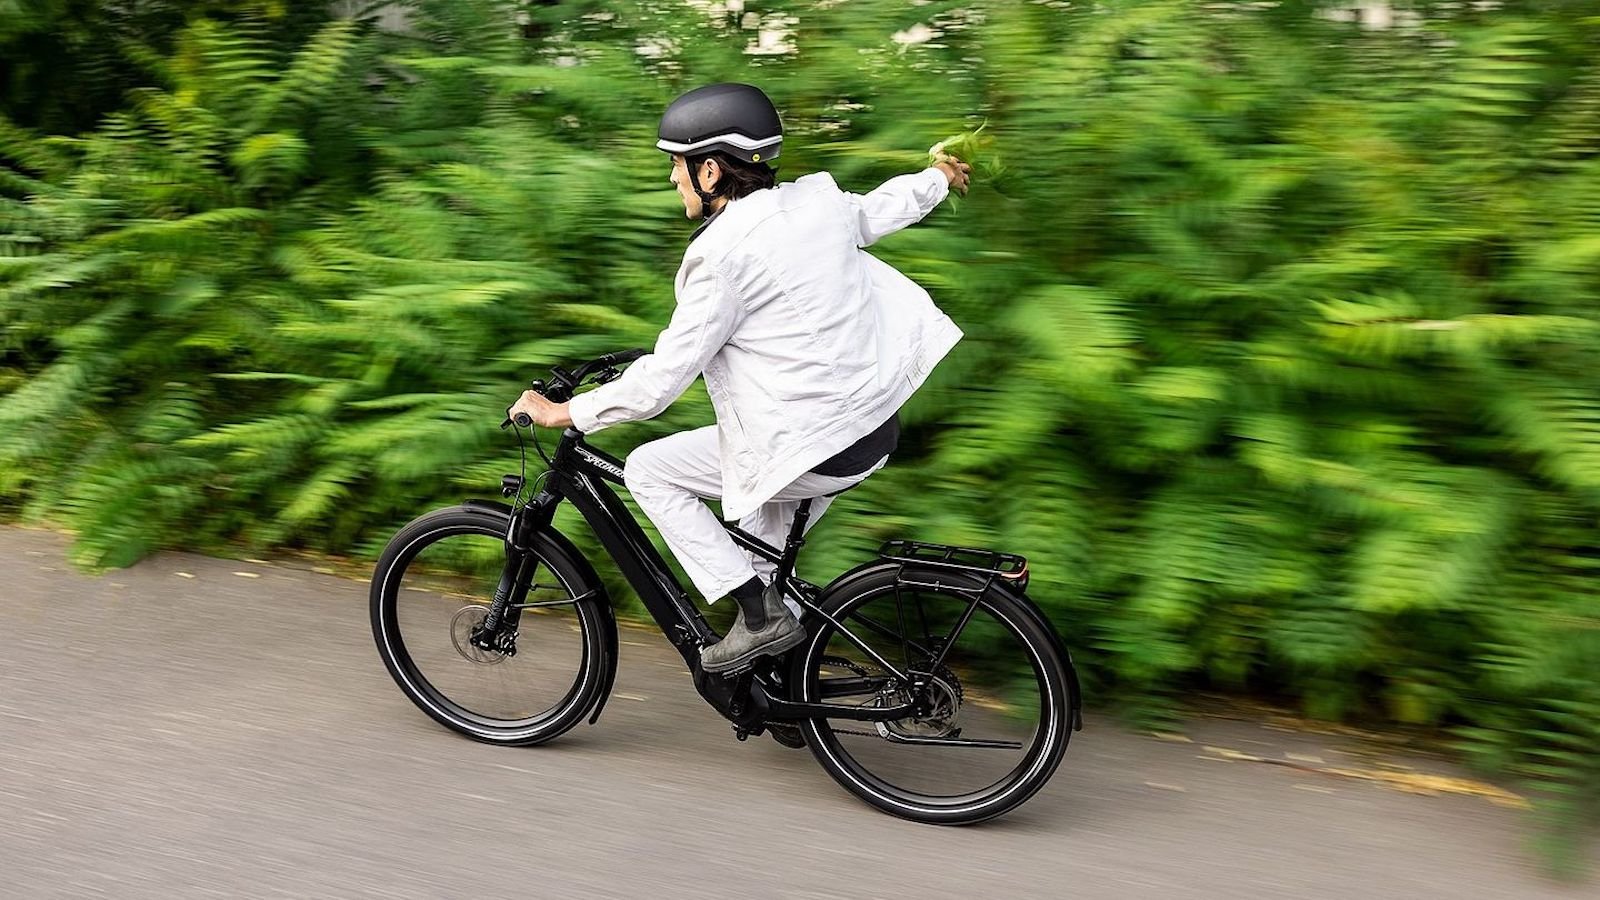 Specialized Turbo Vado 4.0 Step-Through commute eBike reaches 28 mph for daily rides